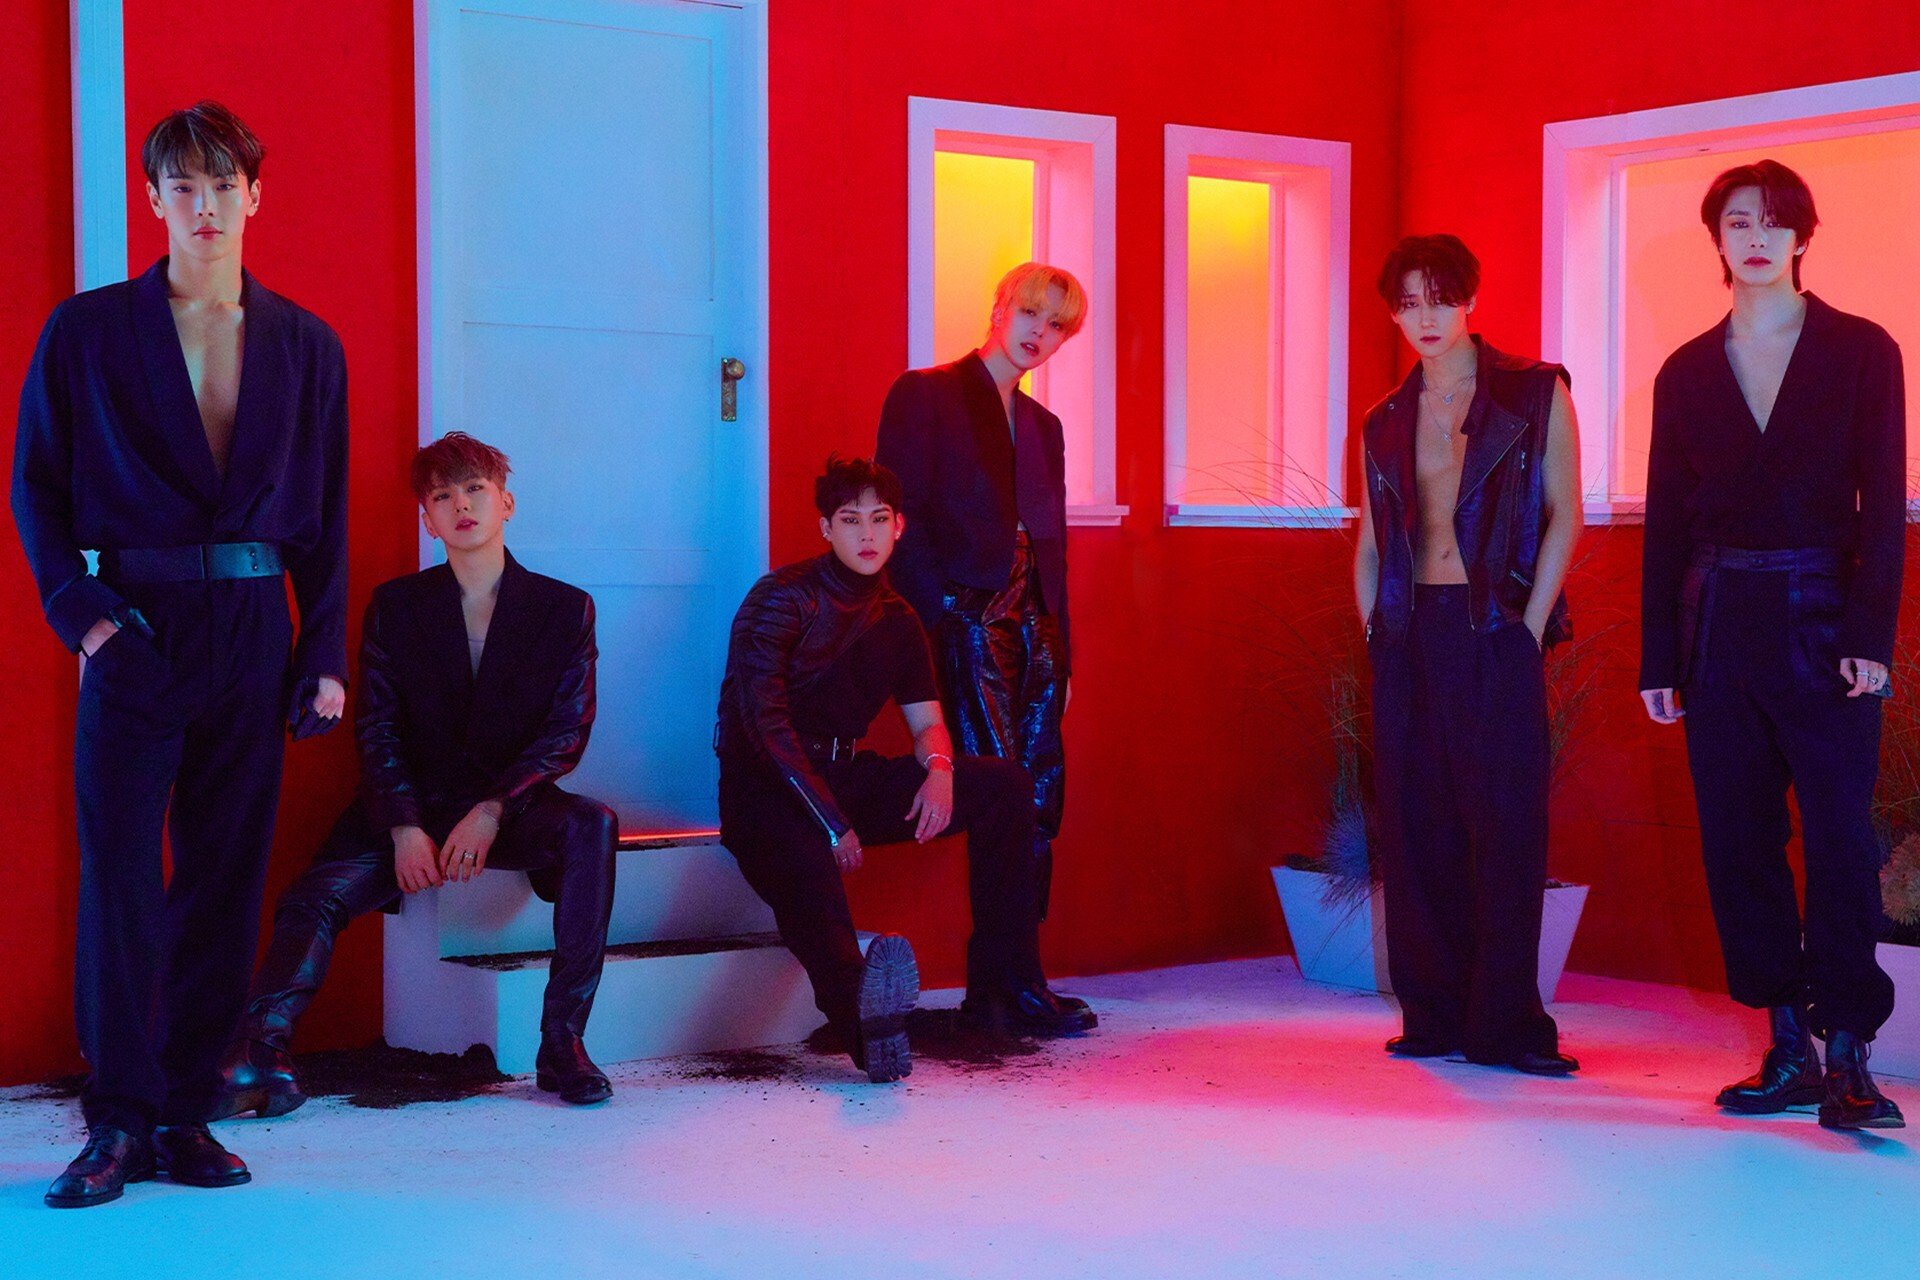 Monsta X release their ninth mini-album, “One of a Kind”, this month. They are among a slew of major K-pop acts dropping new singles, EPs and albums in June.